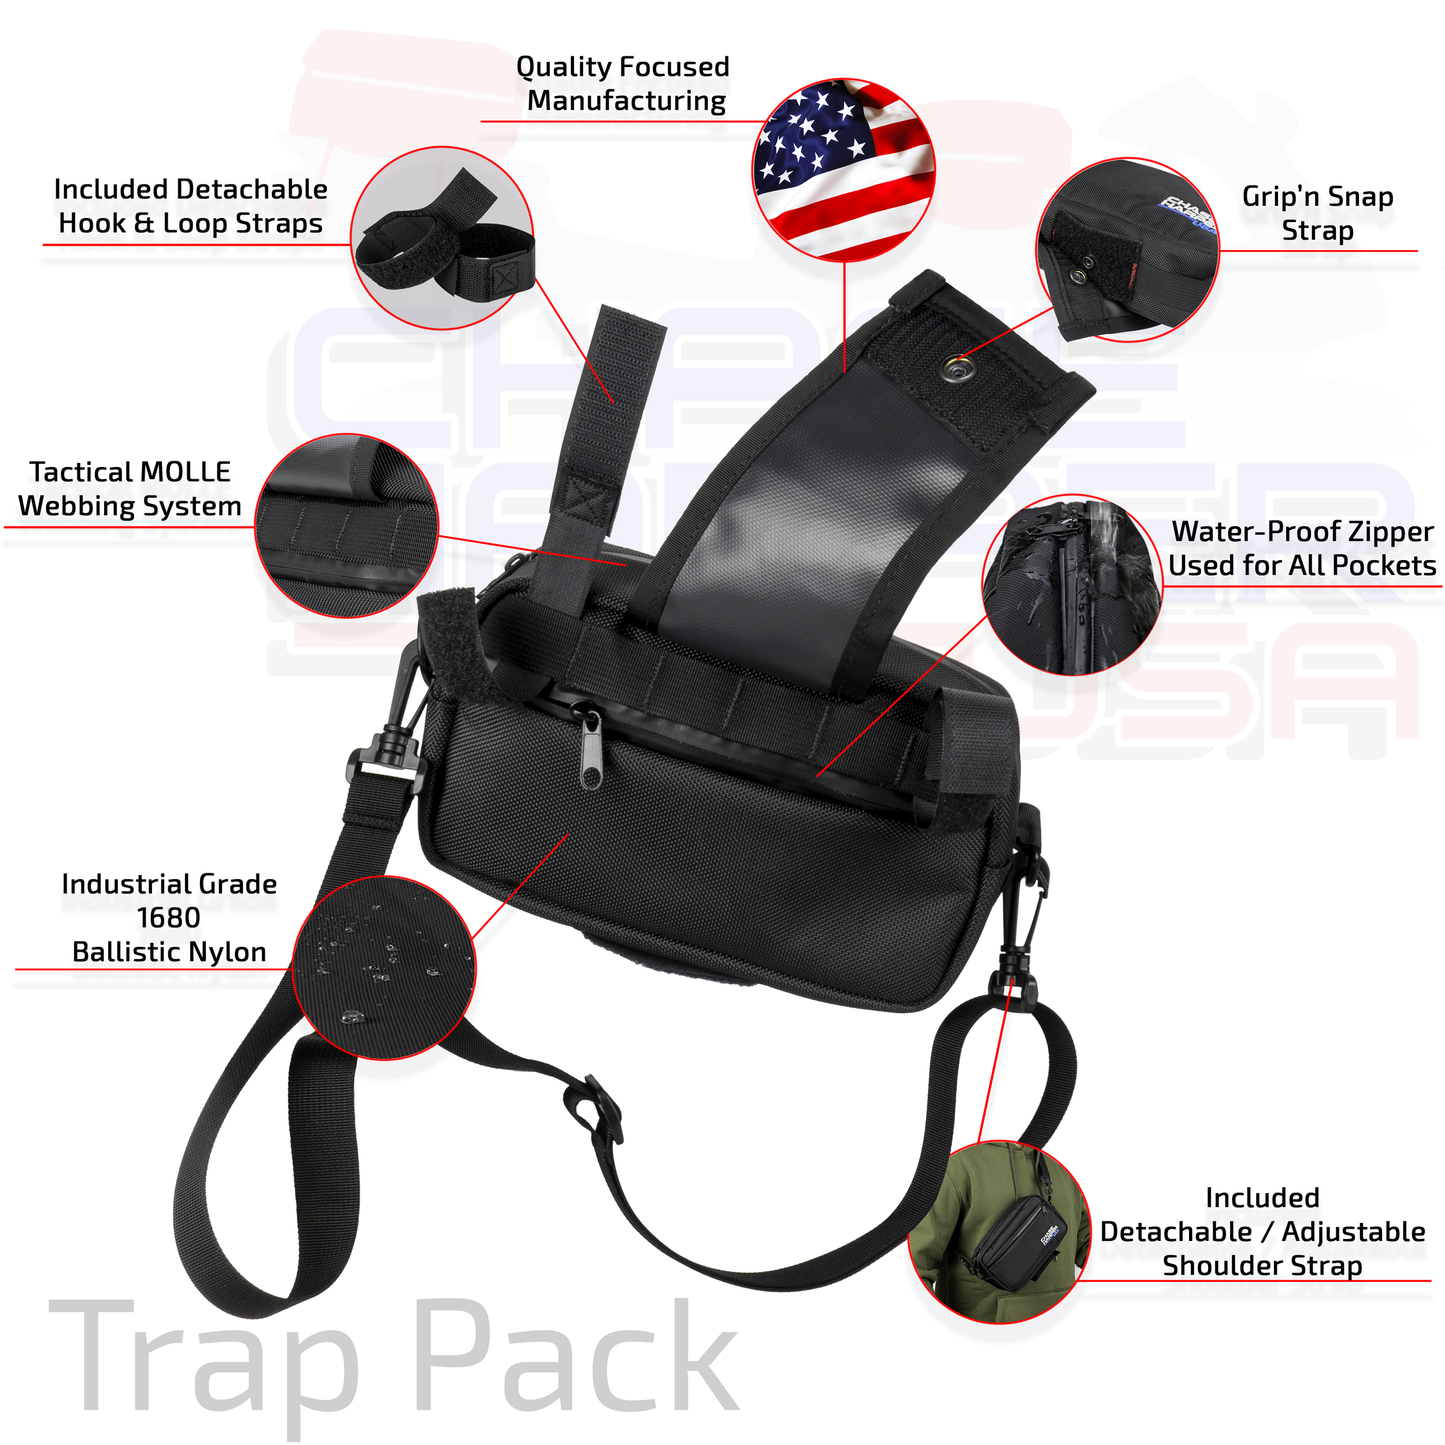 Trap Pack Hip Pouch